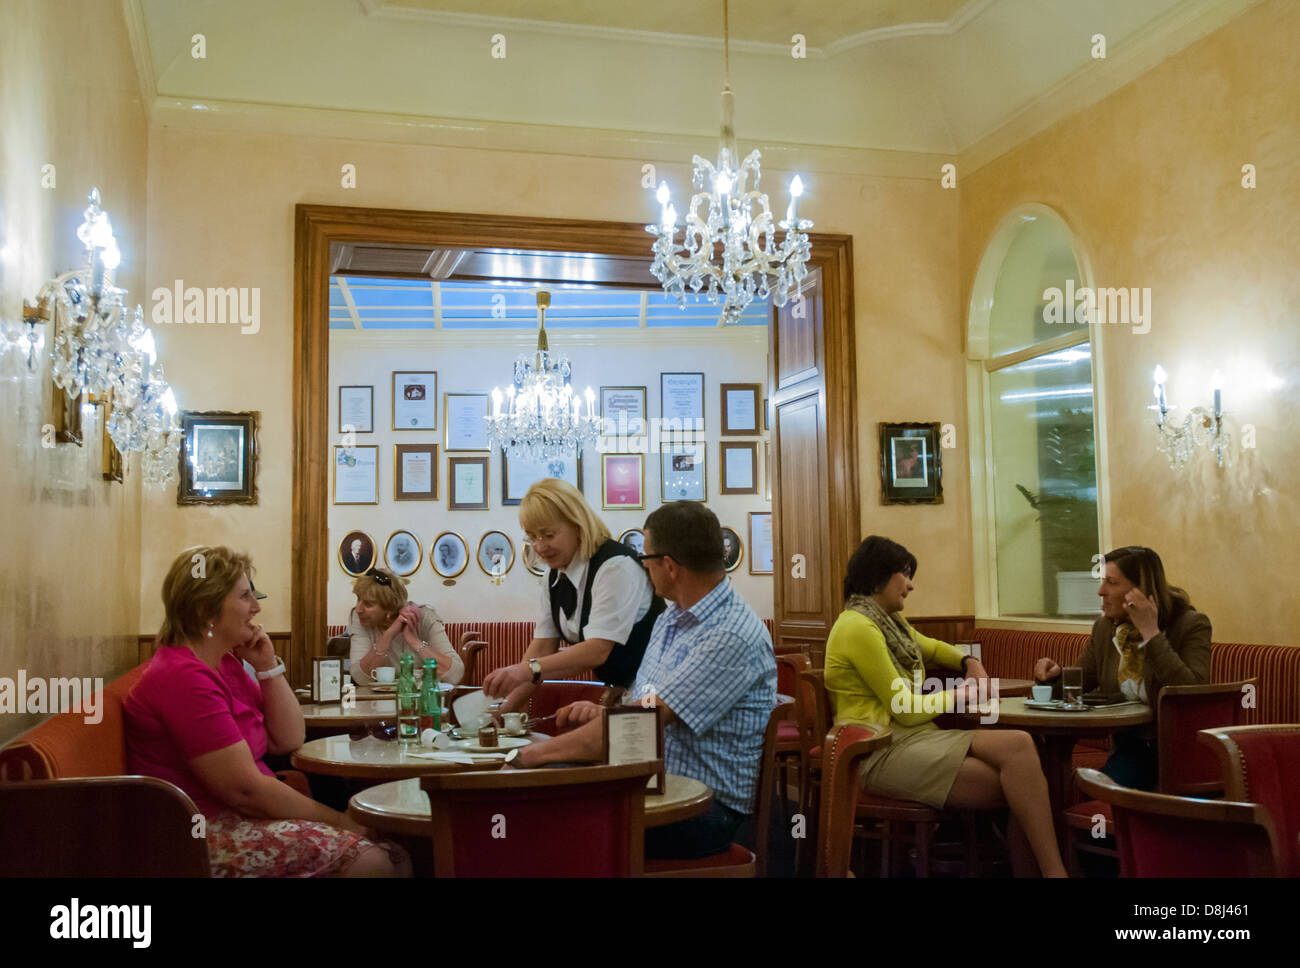 Patrons taking coffee at the Konditorei Zauner, established 1832,  in the Austrian spa town of Bad Ischl. Stock Photo